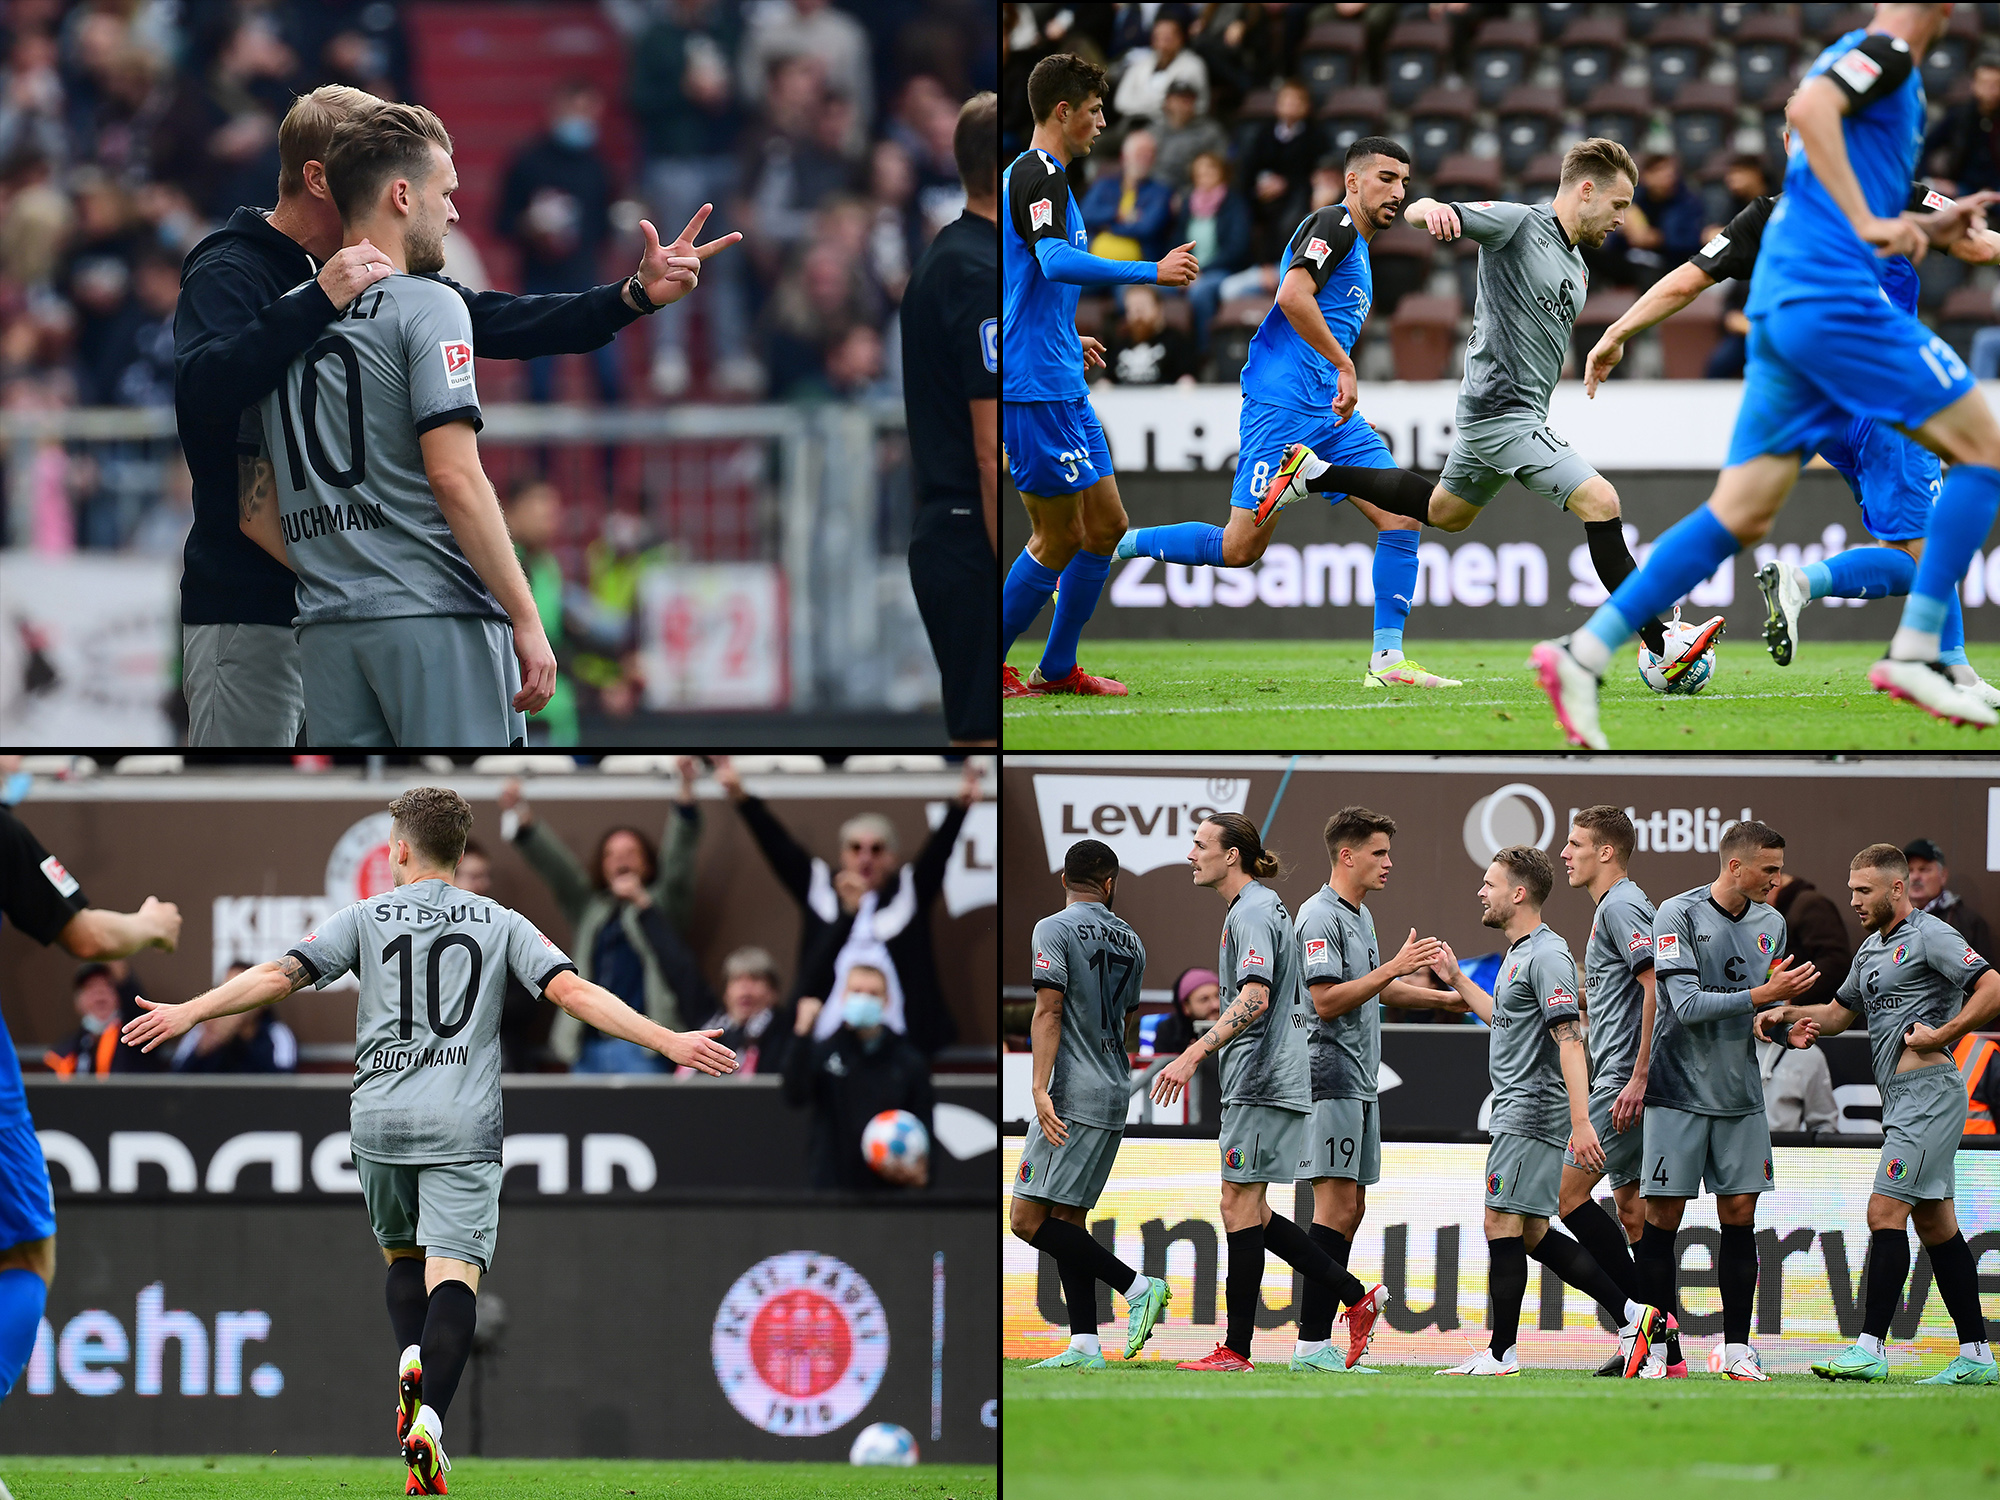 Christopher Buchtmann came on against Ingolstadt with the score at 3-0, and after the visitors had pulled one back, immediately restored the three-goal advantage with his first goal since his return from a lengthy injury layoff.